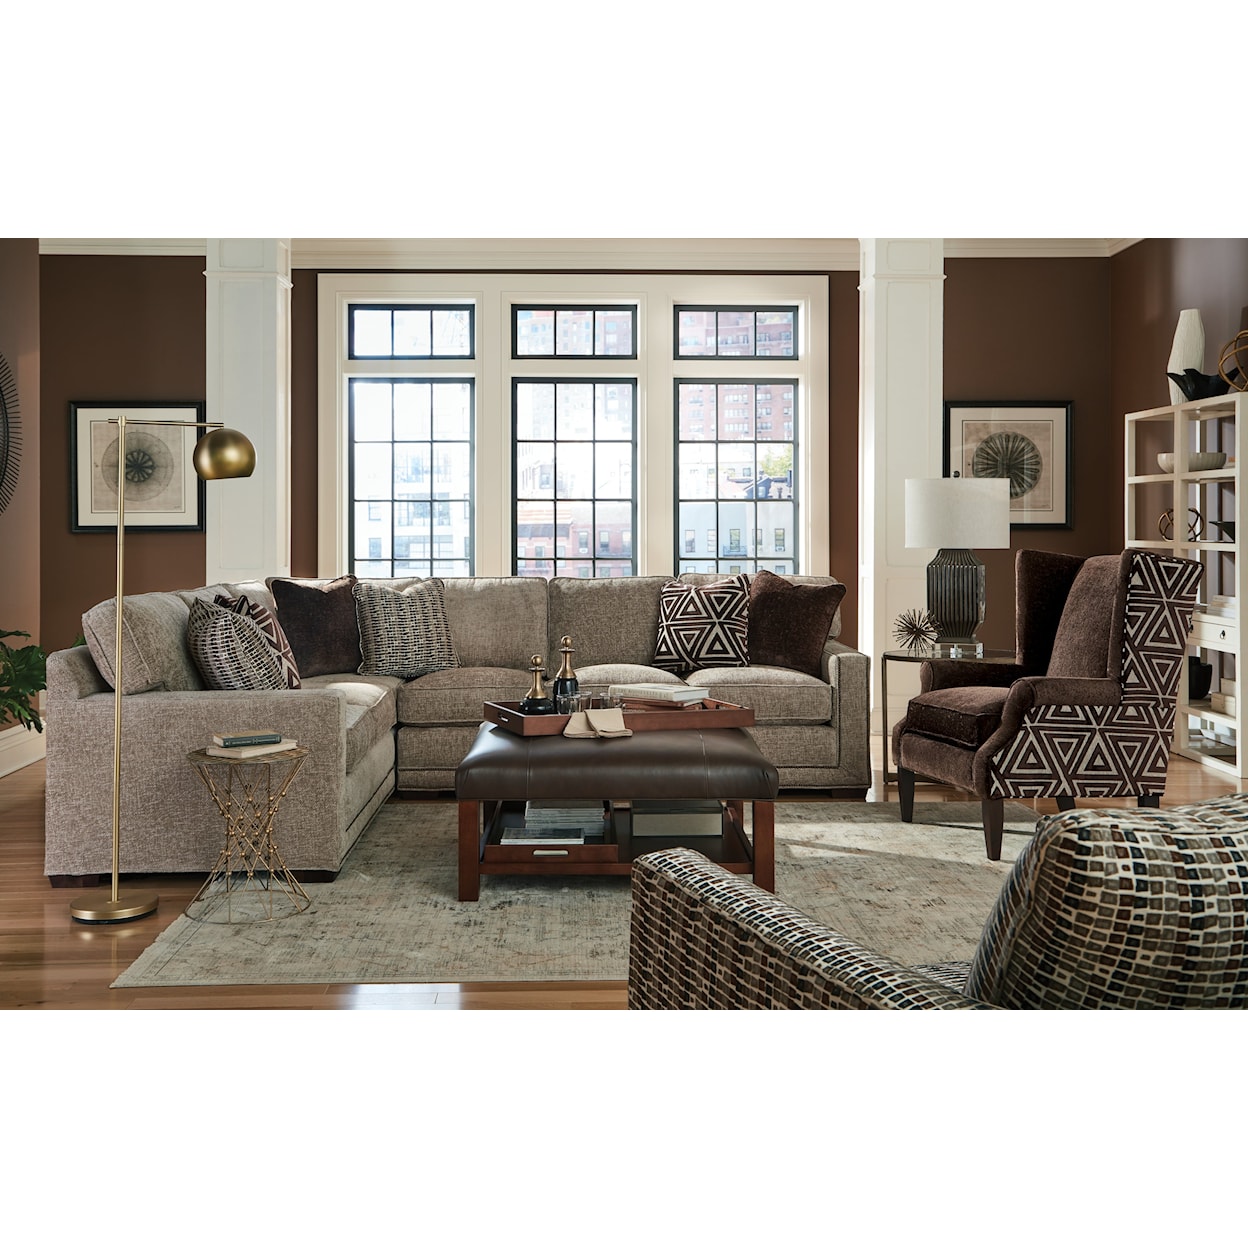 Craftmaster 723250 Sectional Sofas